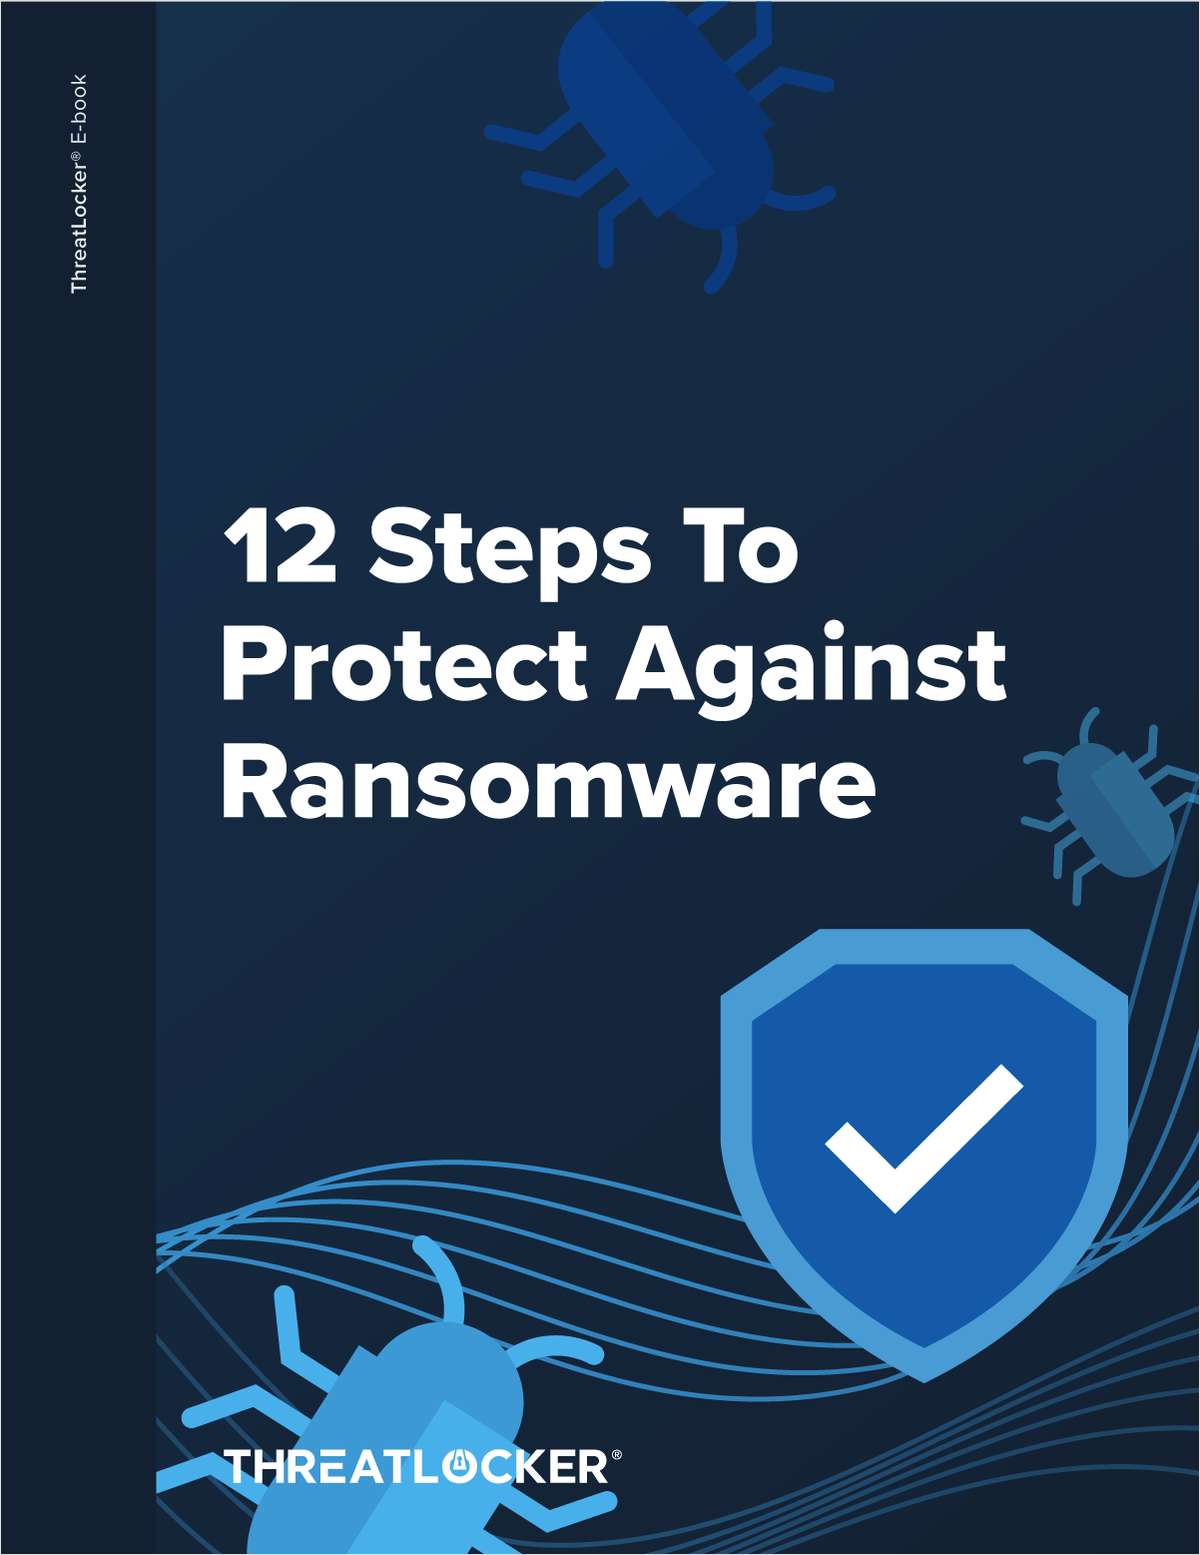 12 Steps to Protect Against Ransomware